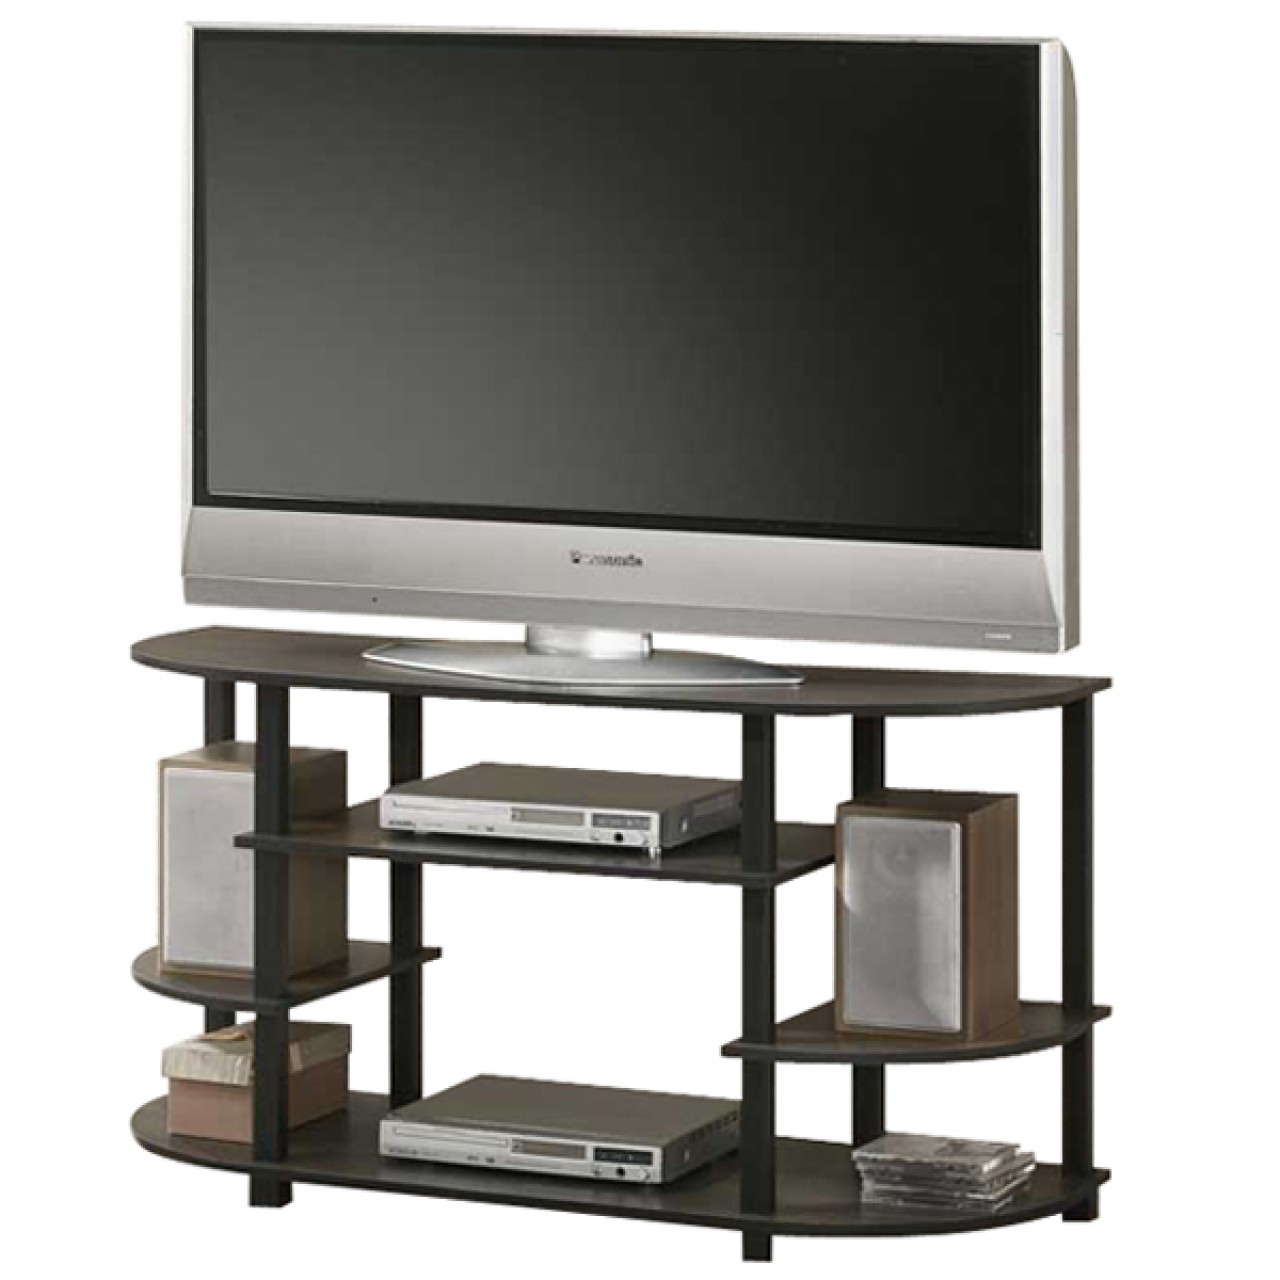 BRIGHTHOME 3 LAYER TV STAND PPS-B27S  